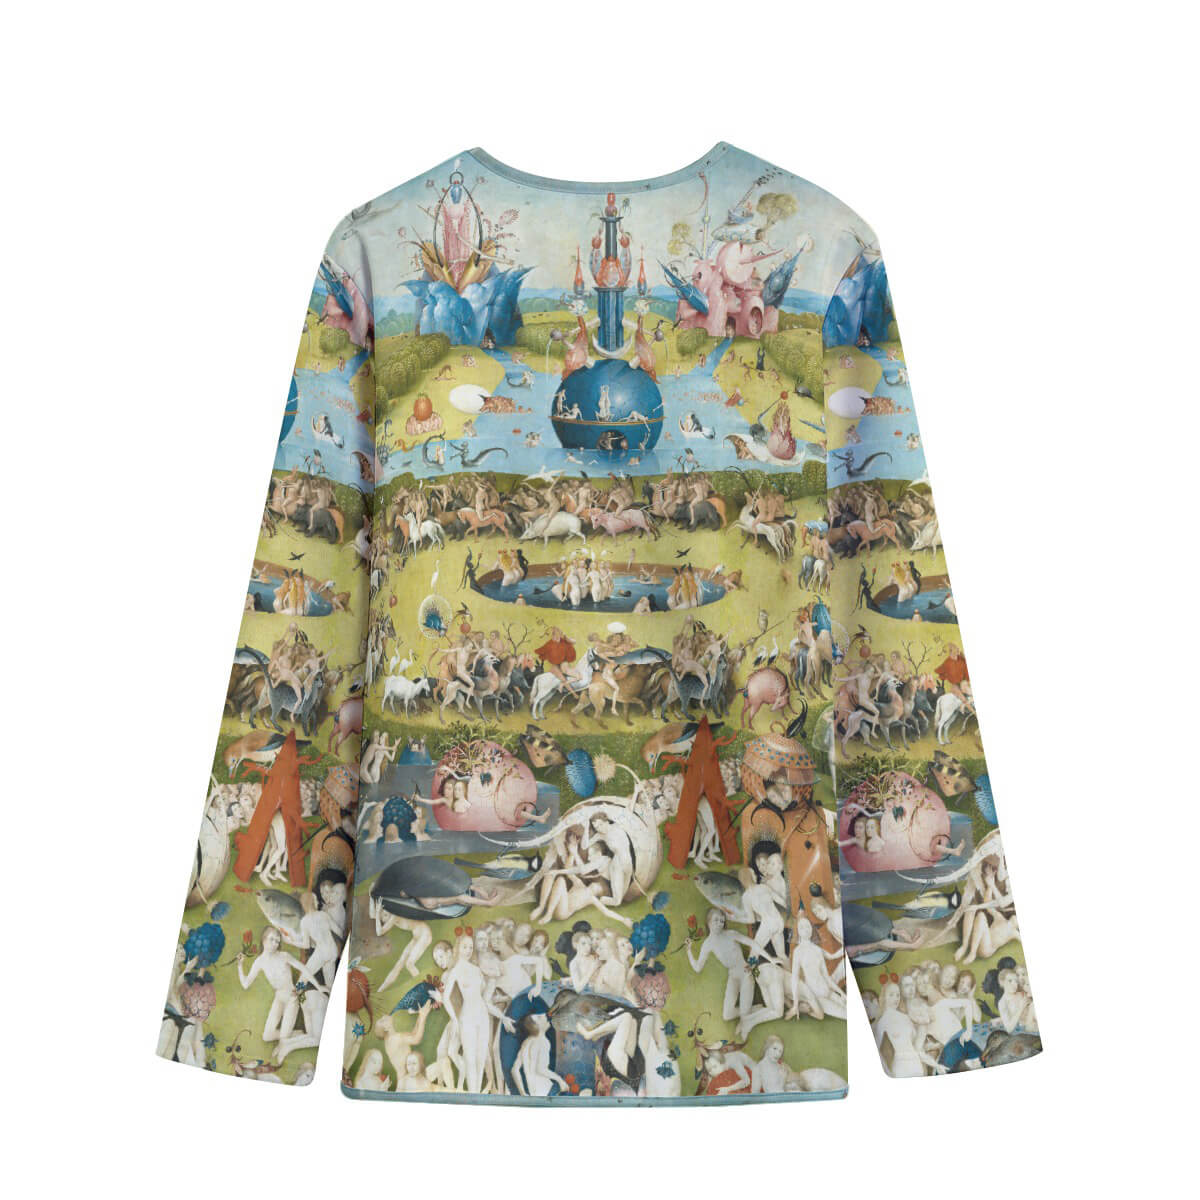 Women's Fashion Inspired by Garden of Earthly Delights Painting